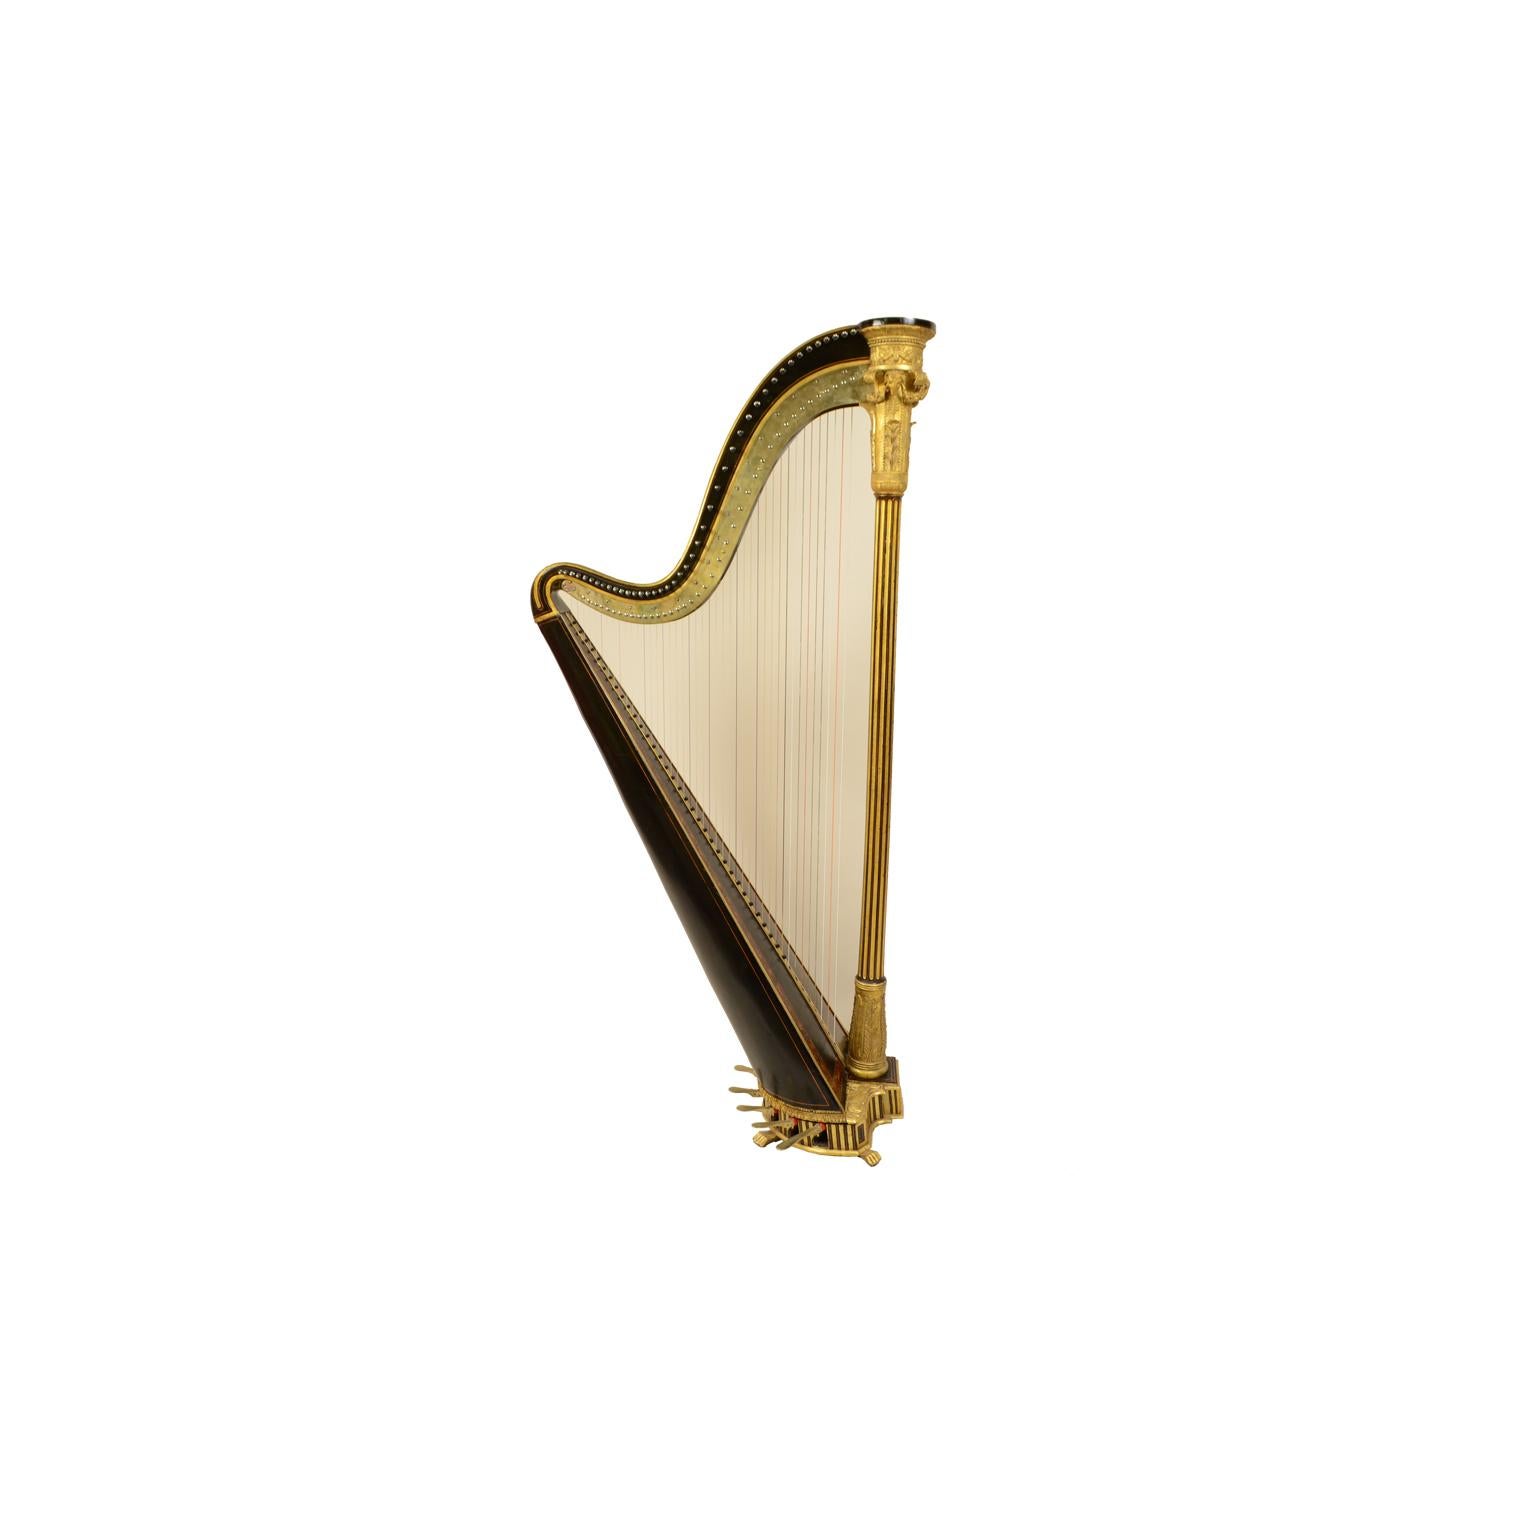 Harp signed by Sebastian Erard's Patent Harp N. 881 N. 18 Great Marlborough Street London datable between 1808 and 1809.
Erard (Strasbourg, 5th April 1752-Passy, 5th August 1831) was a French musical instrument maker. He specialized in the